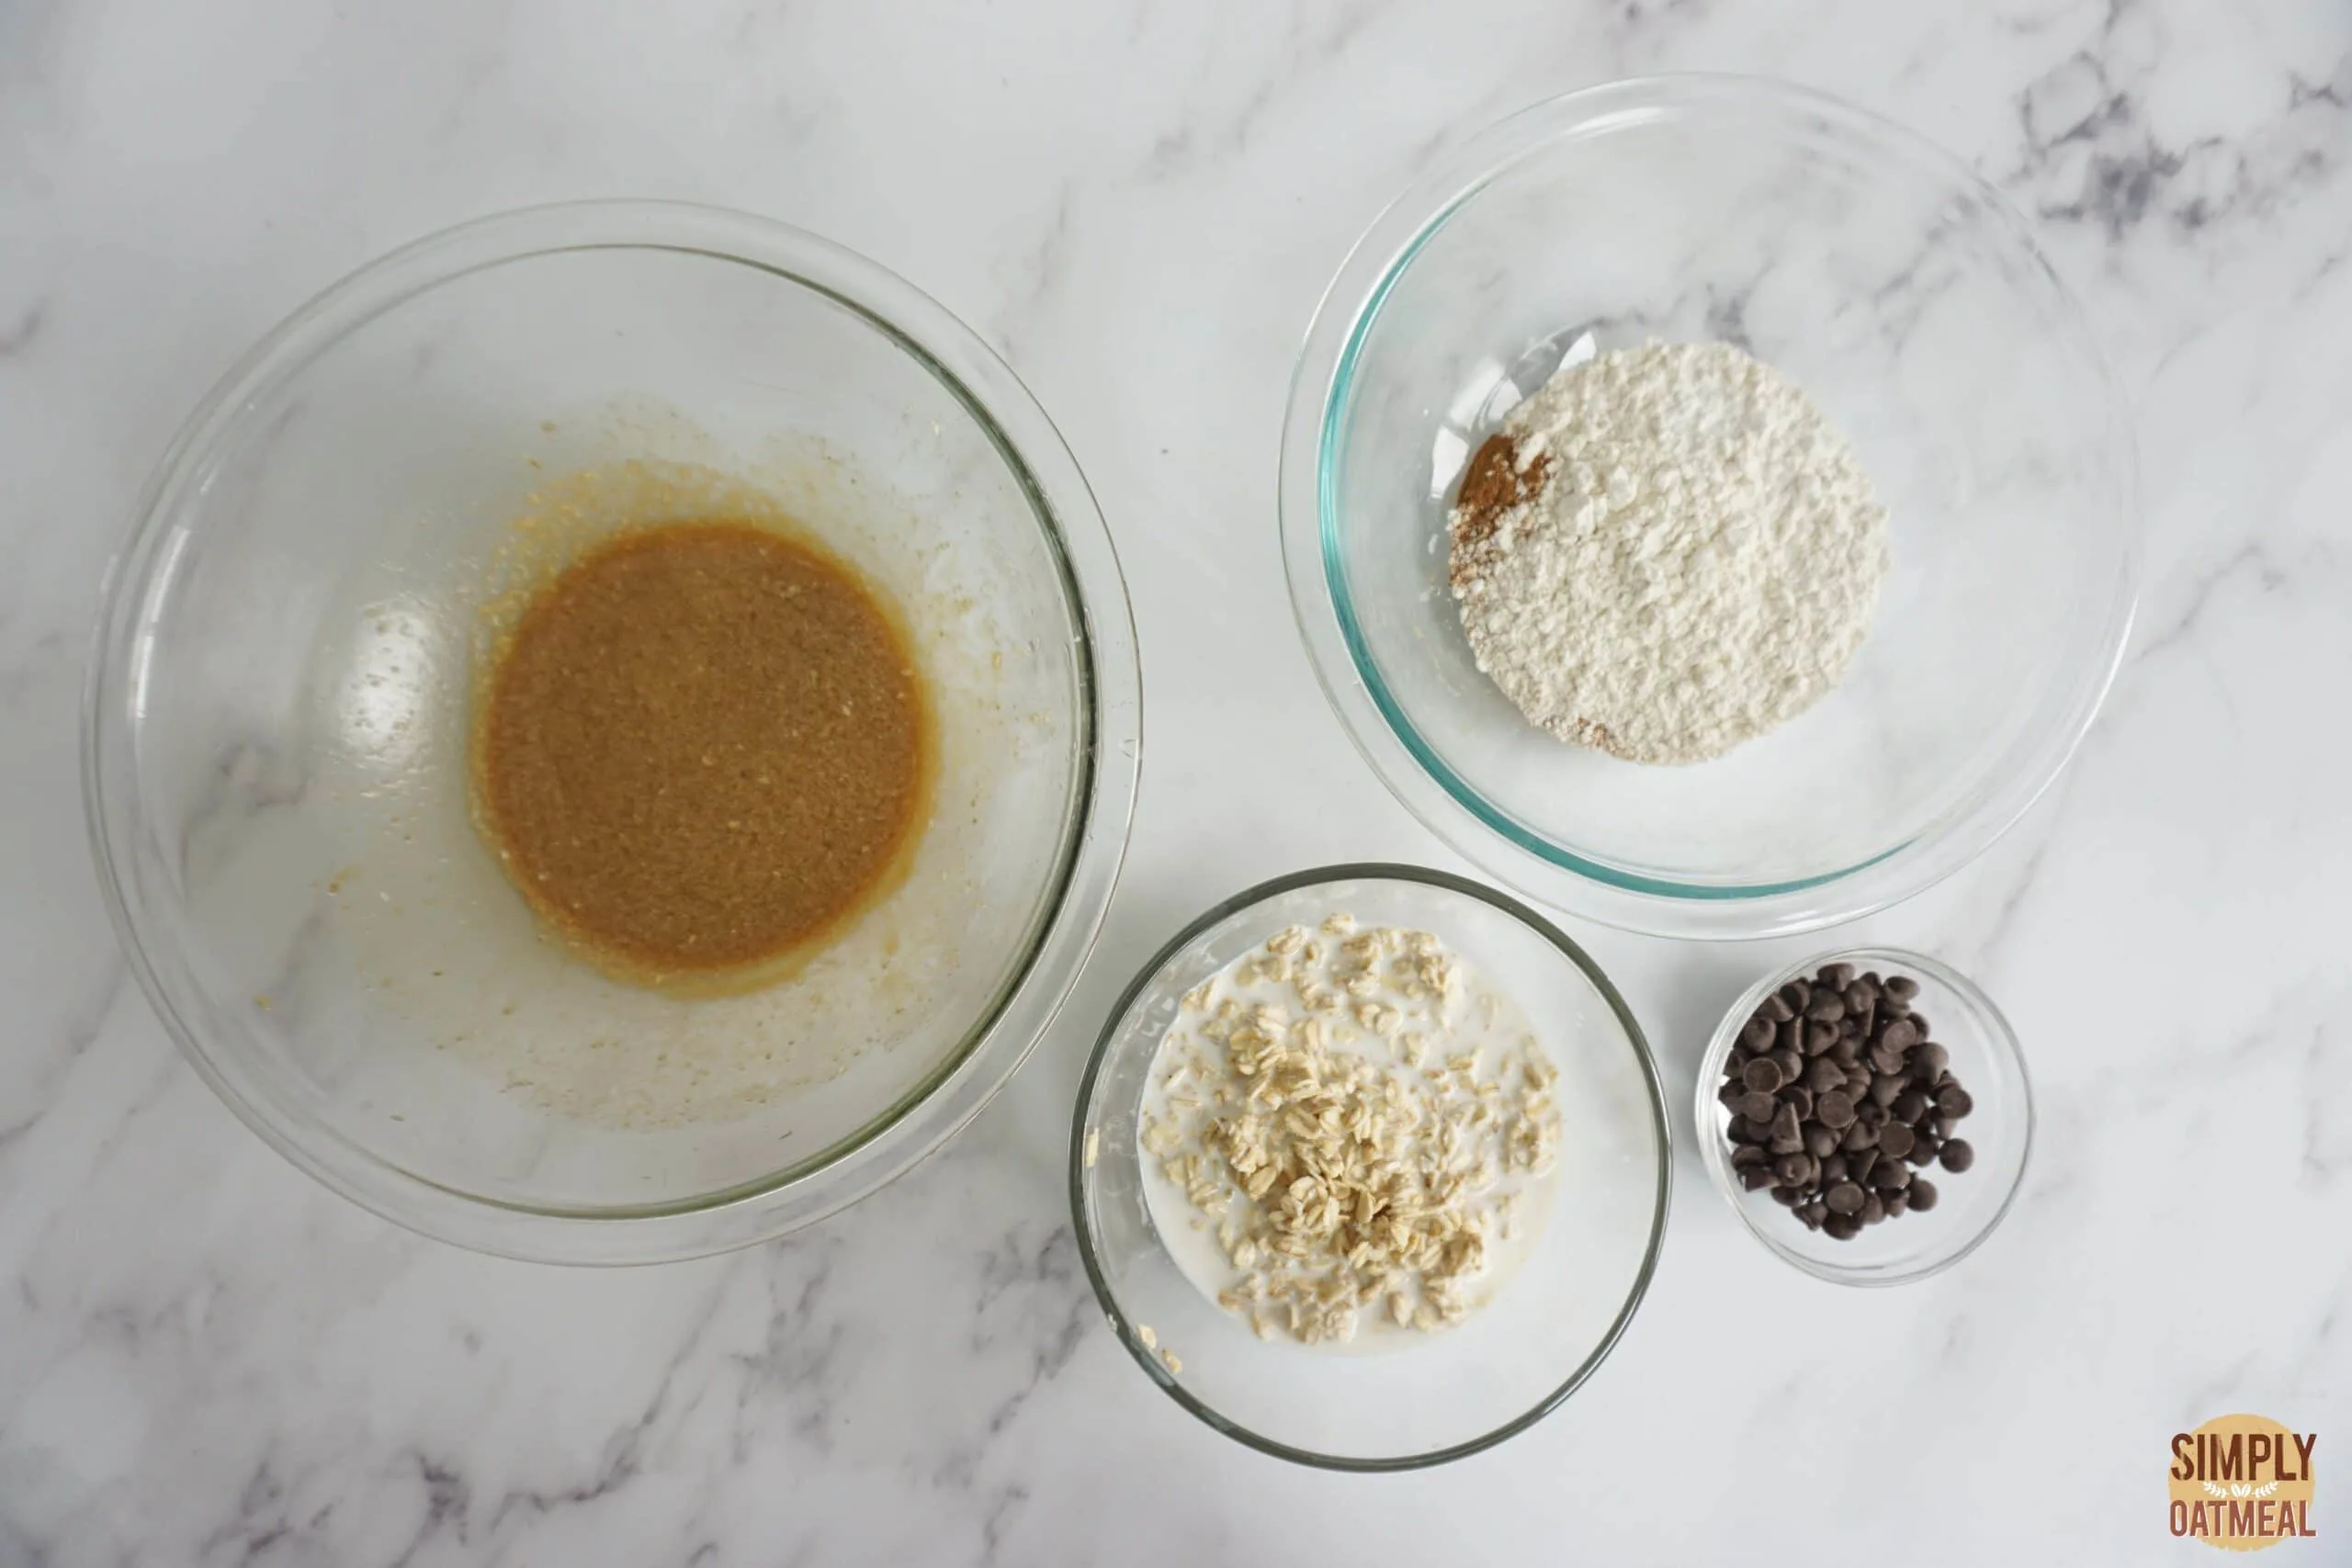 Wet and dry ingredients to make chocolate chip oatmeal muffins